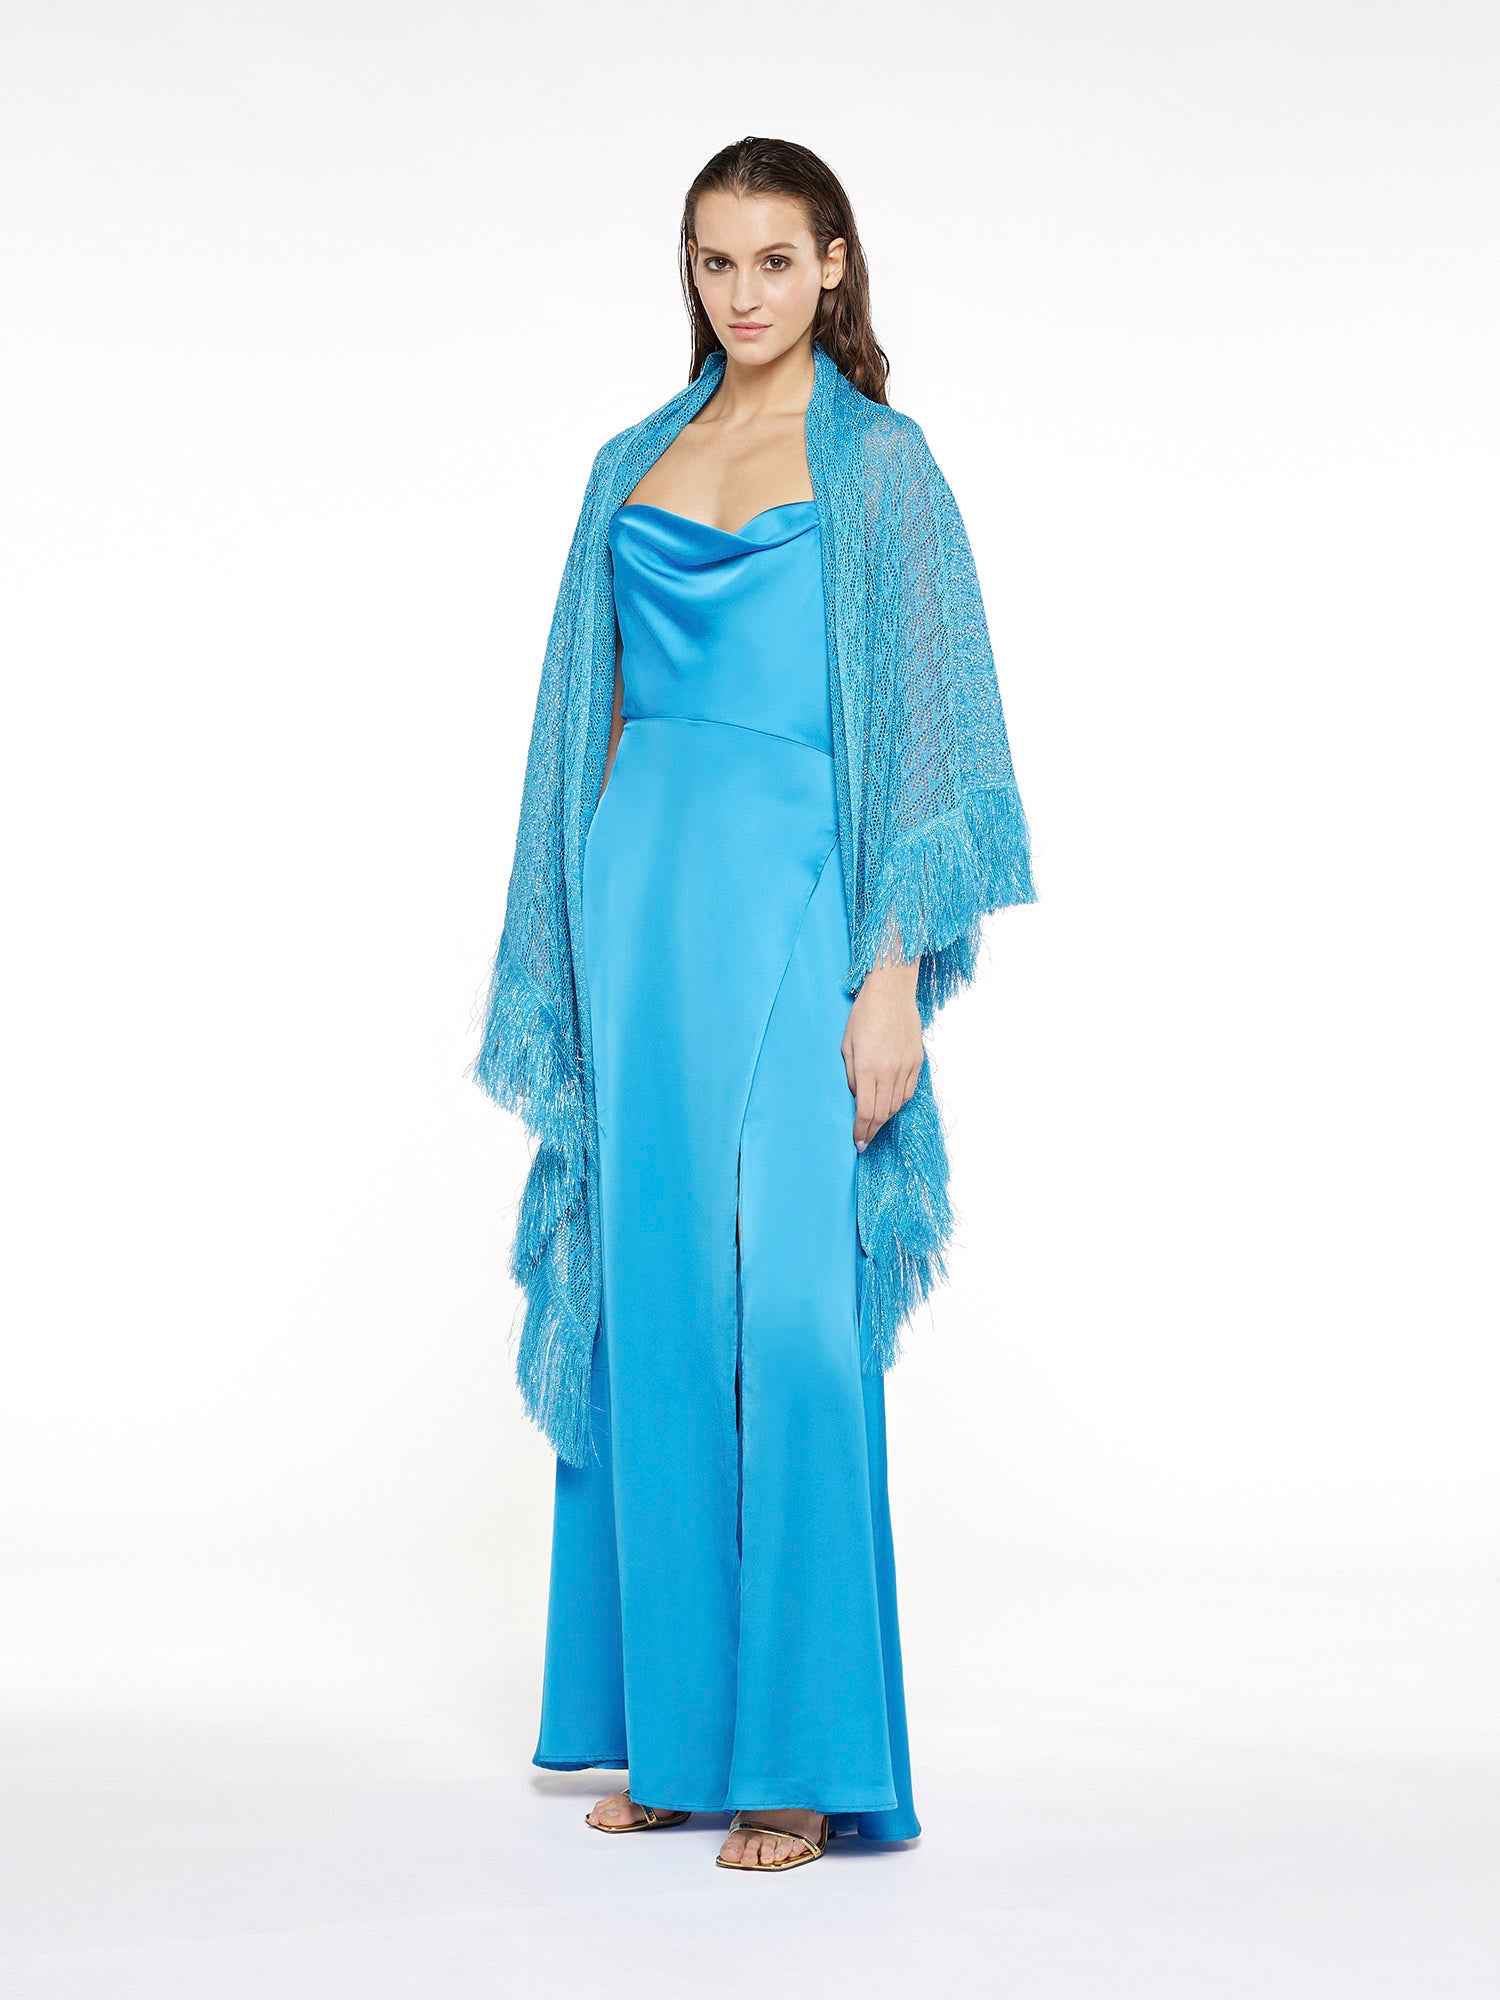 Perforated lurex shawl with fringes